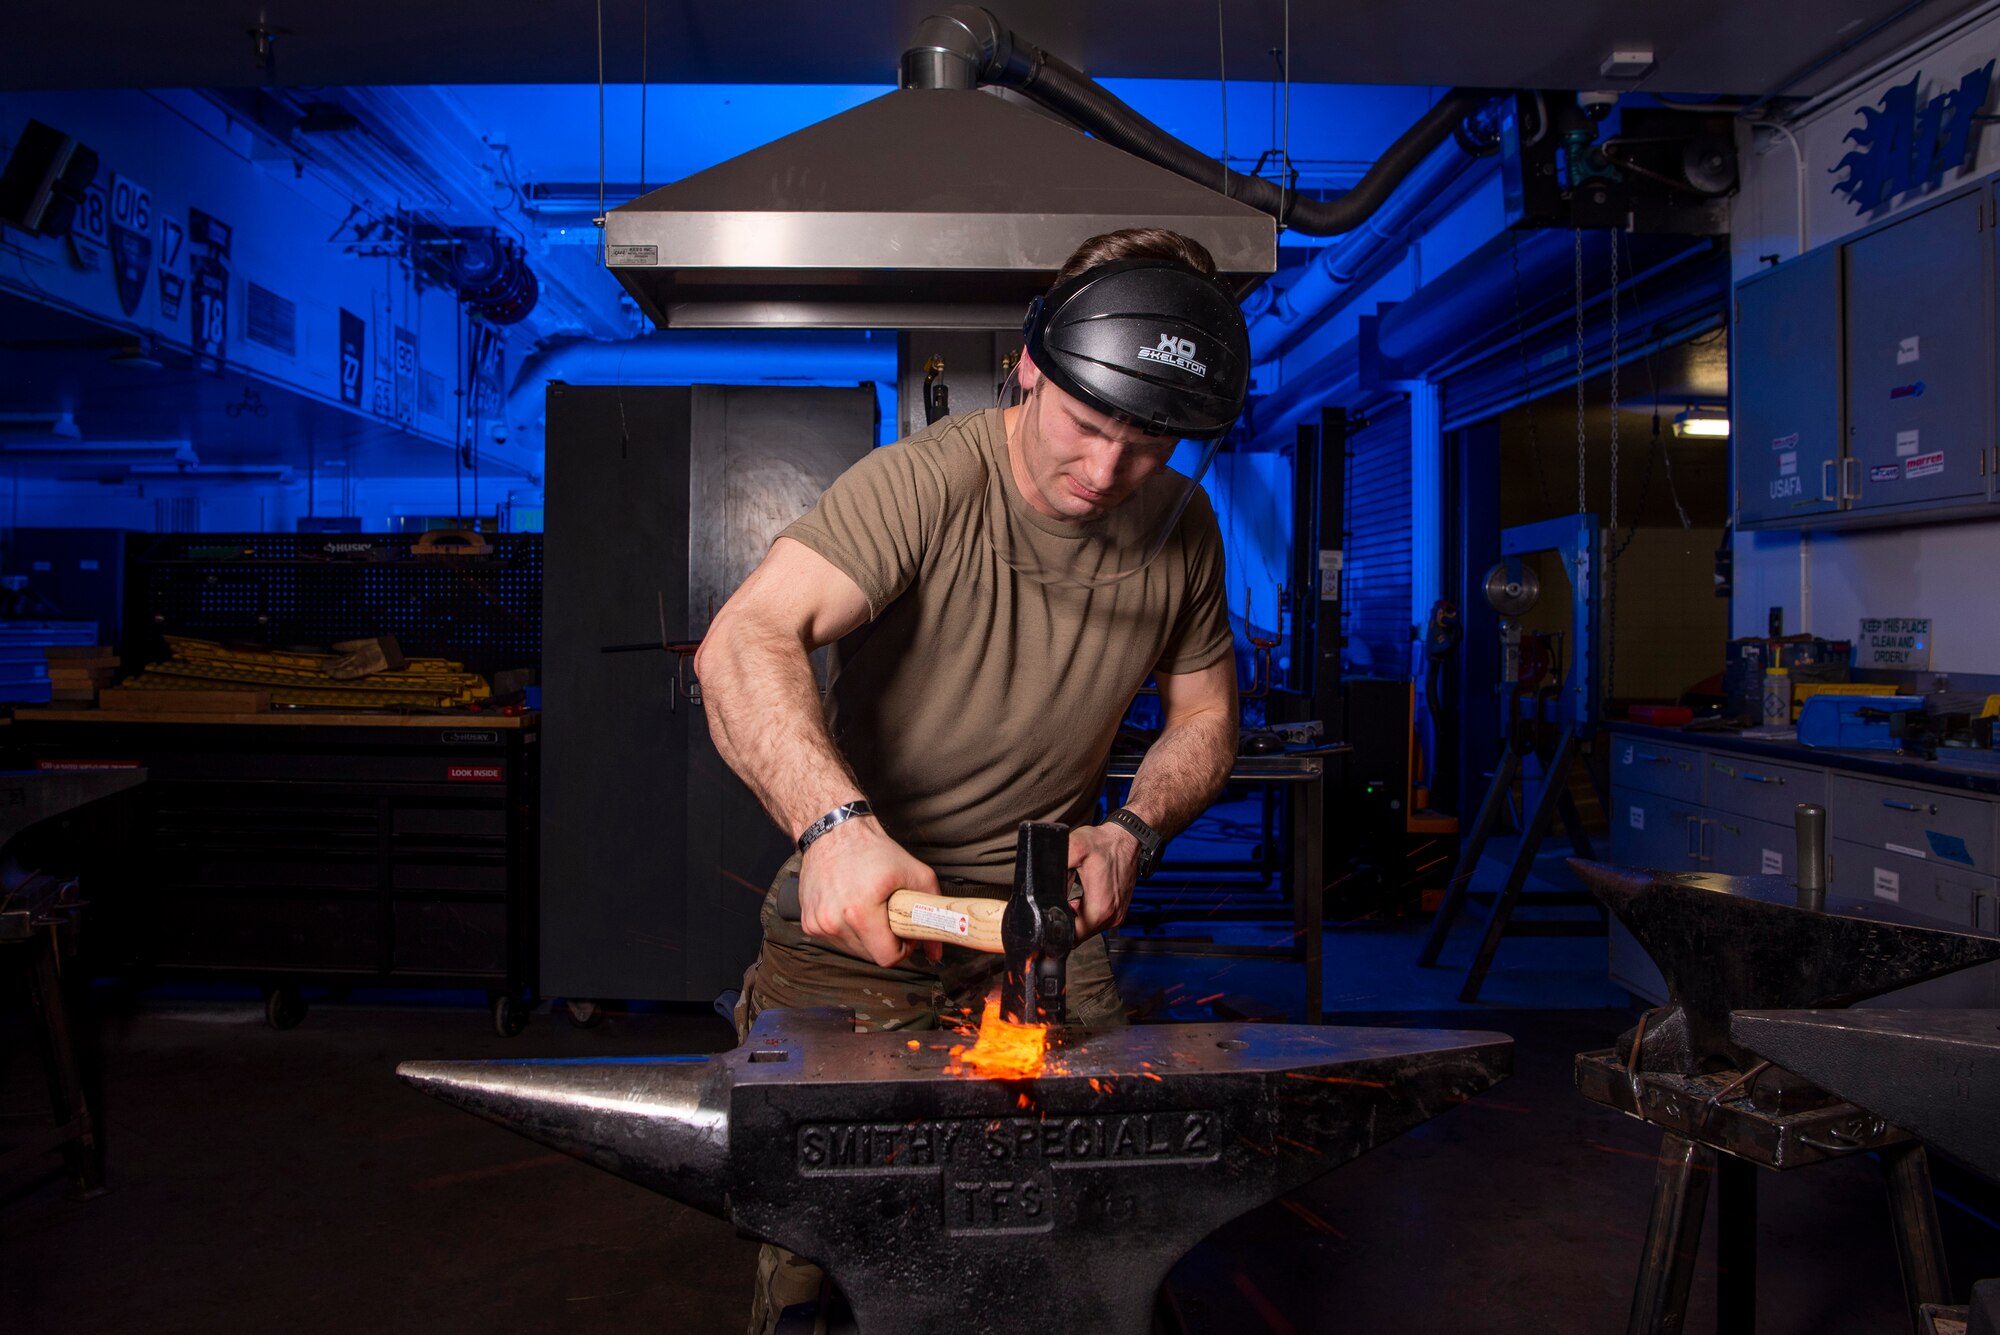 A Cadet shapes a piece of hot steel into a knife